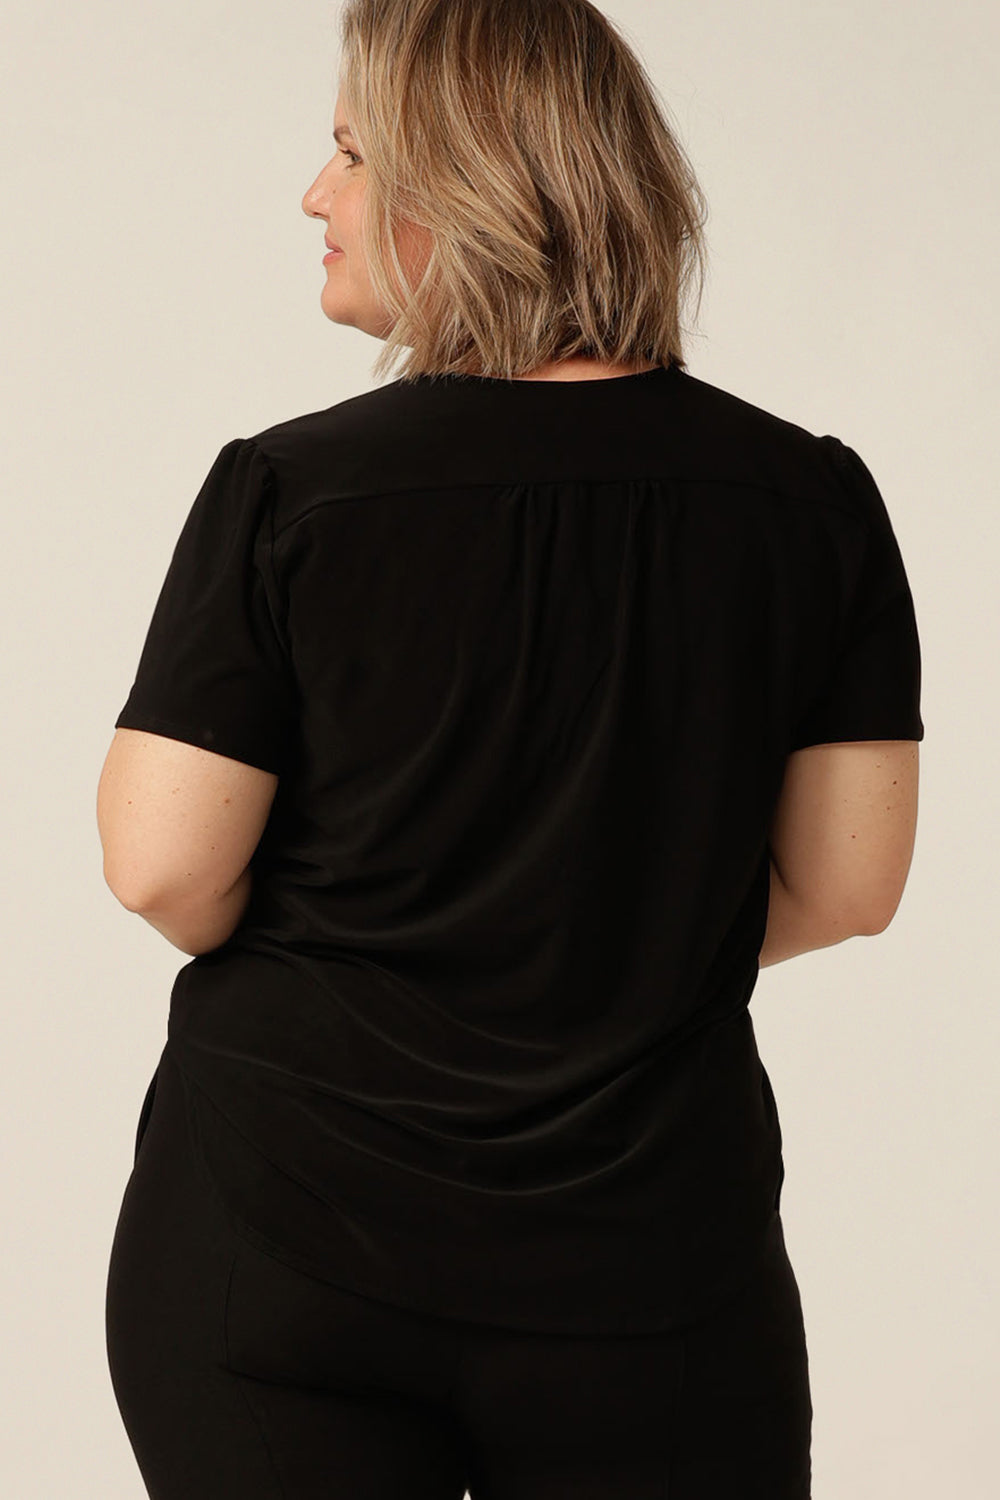 tailored short sleeve top with v-neckline and shirttail hemline